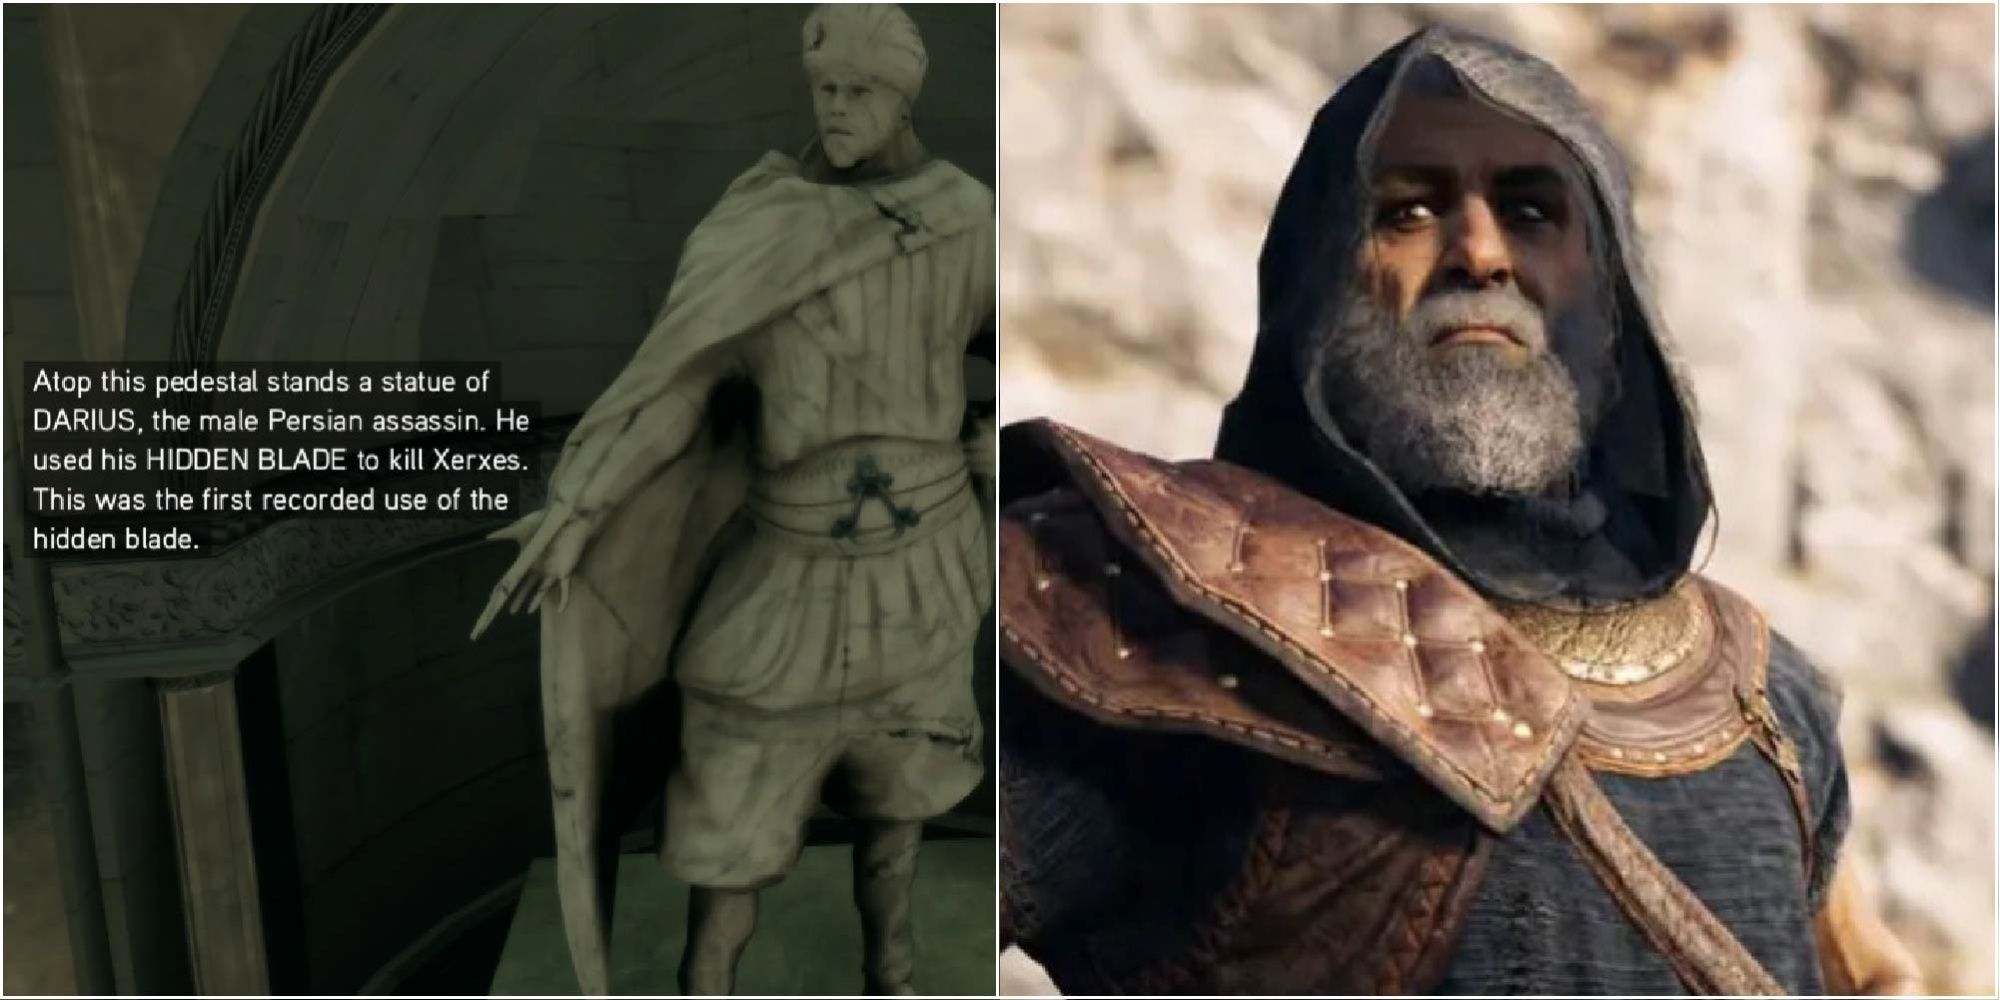 Darius, from Assassin's Creed 2 and Assassin's Creed Odyssey